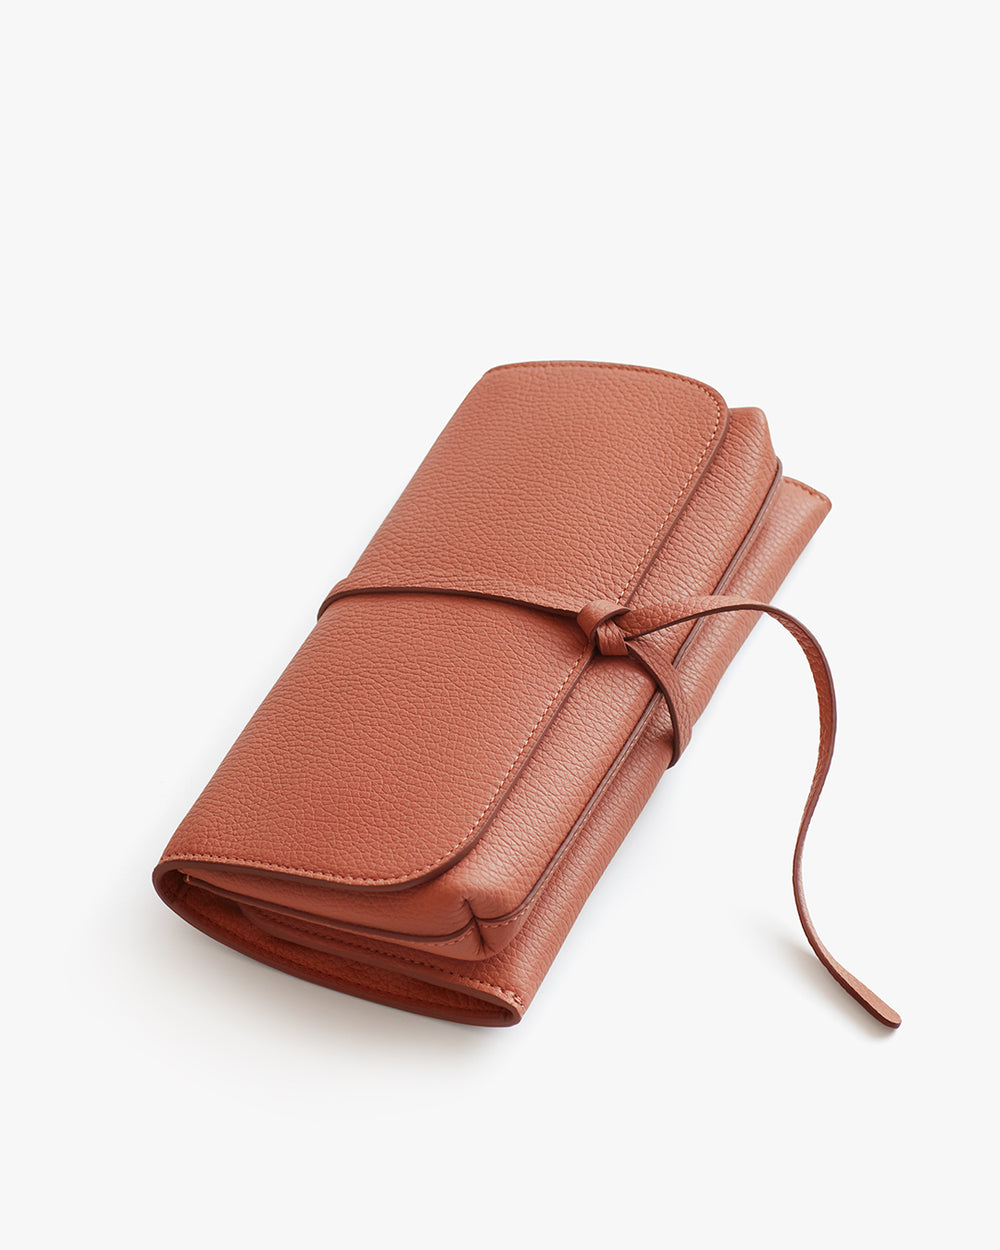 Leather wallet with wrap-around tie closure on a white background.